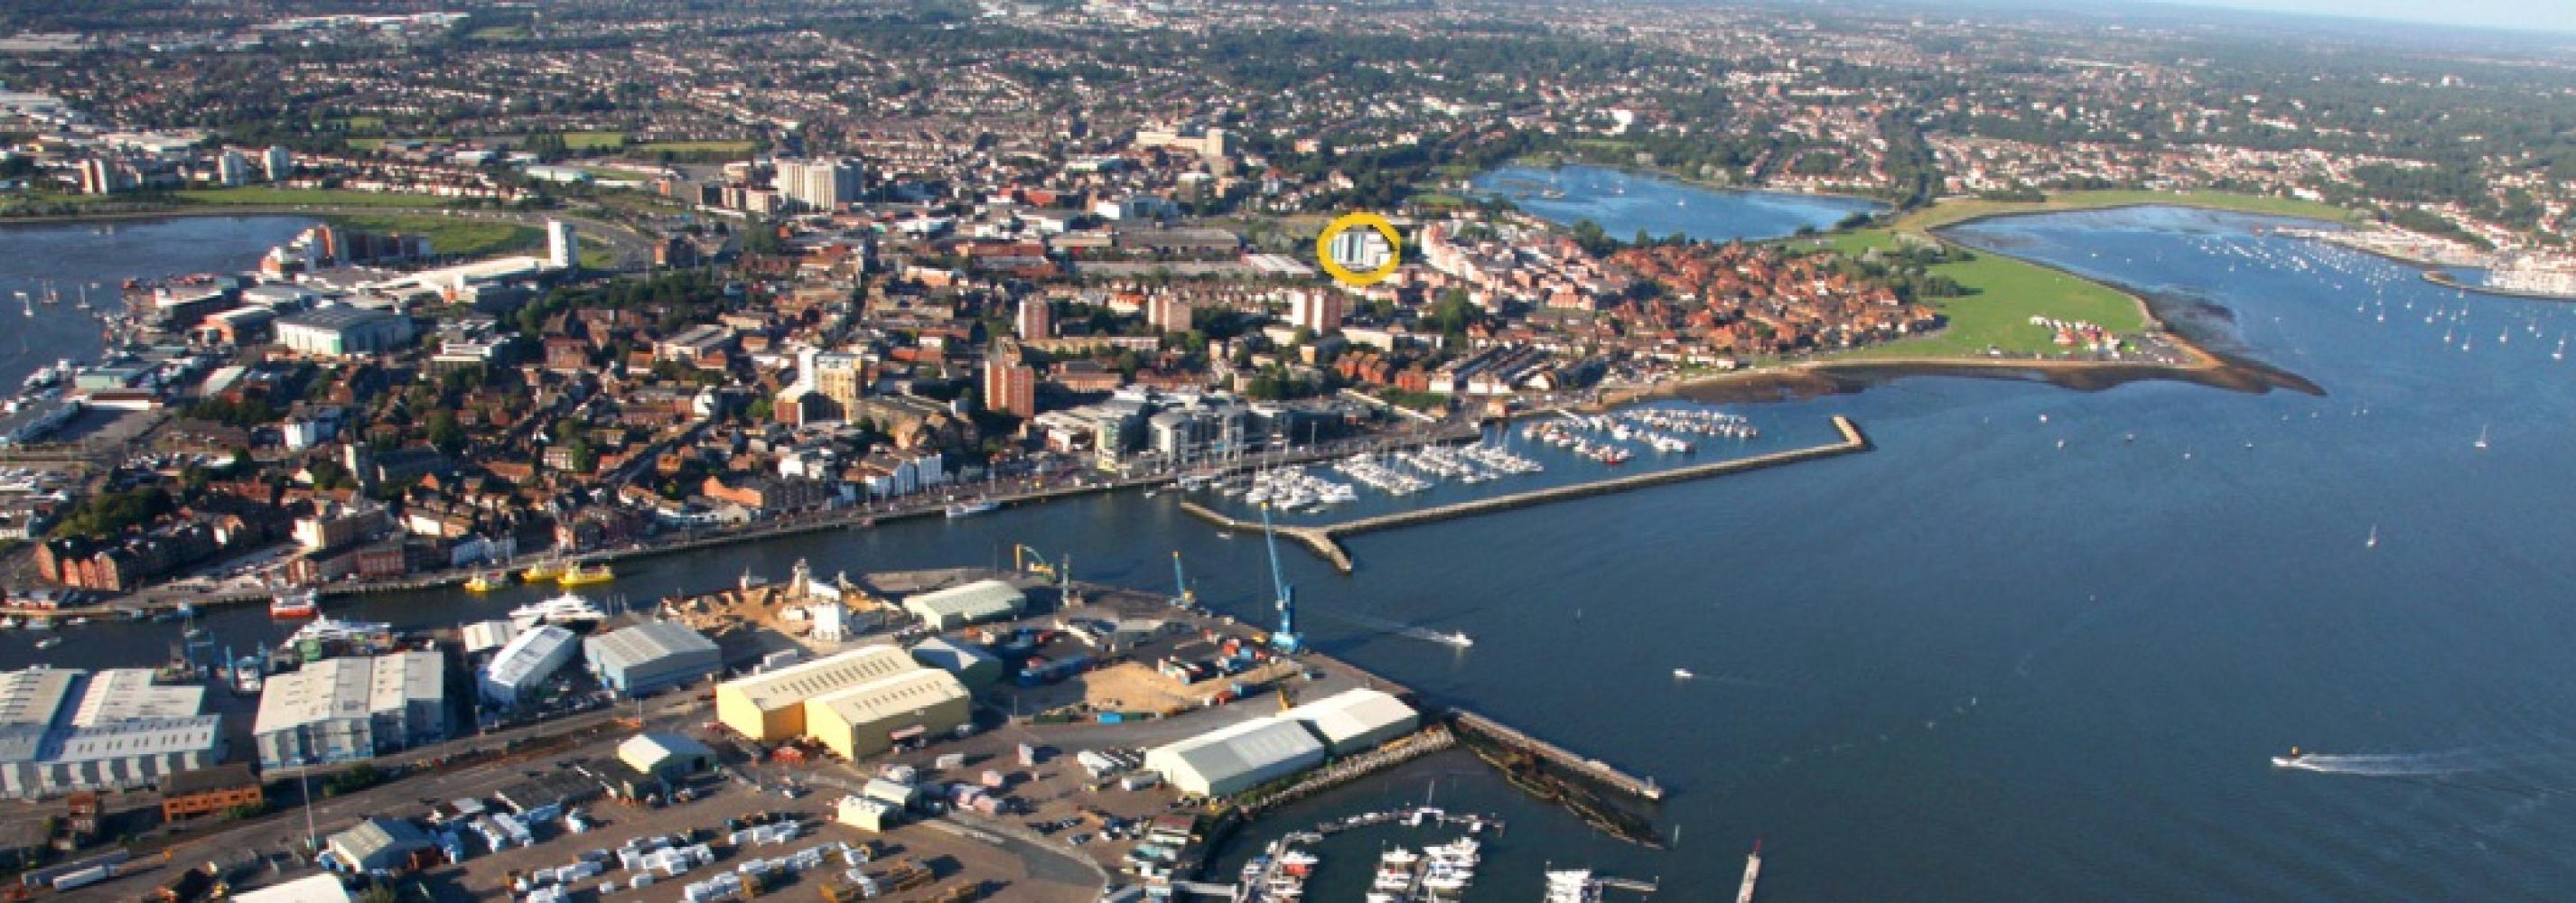 Poole aerial view